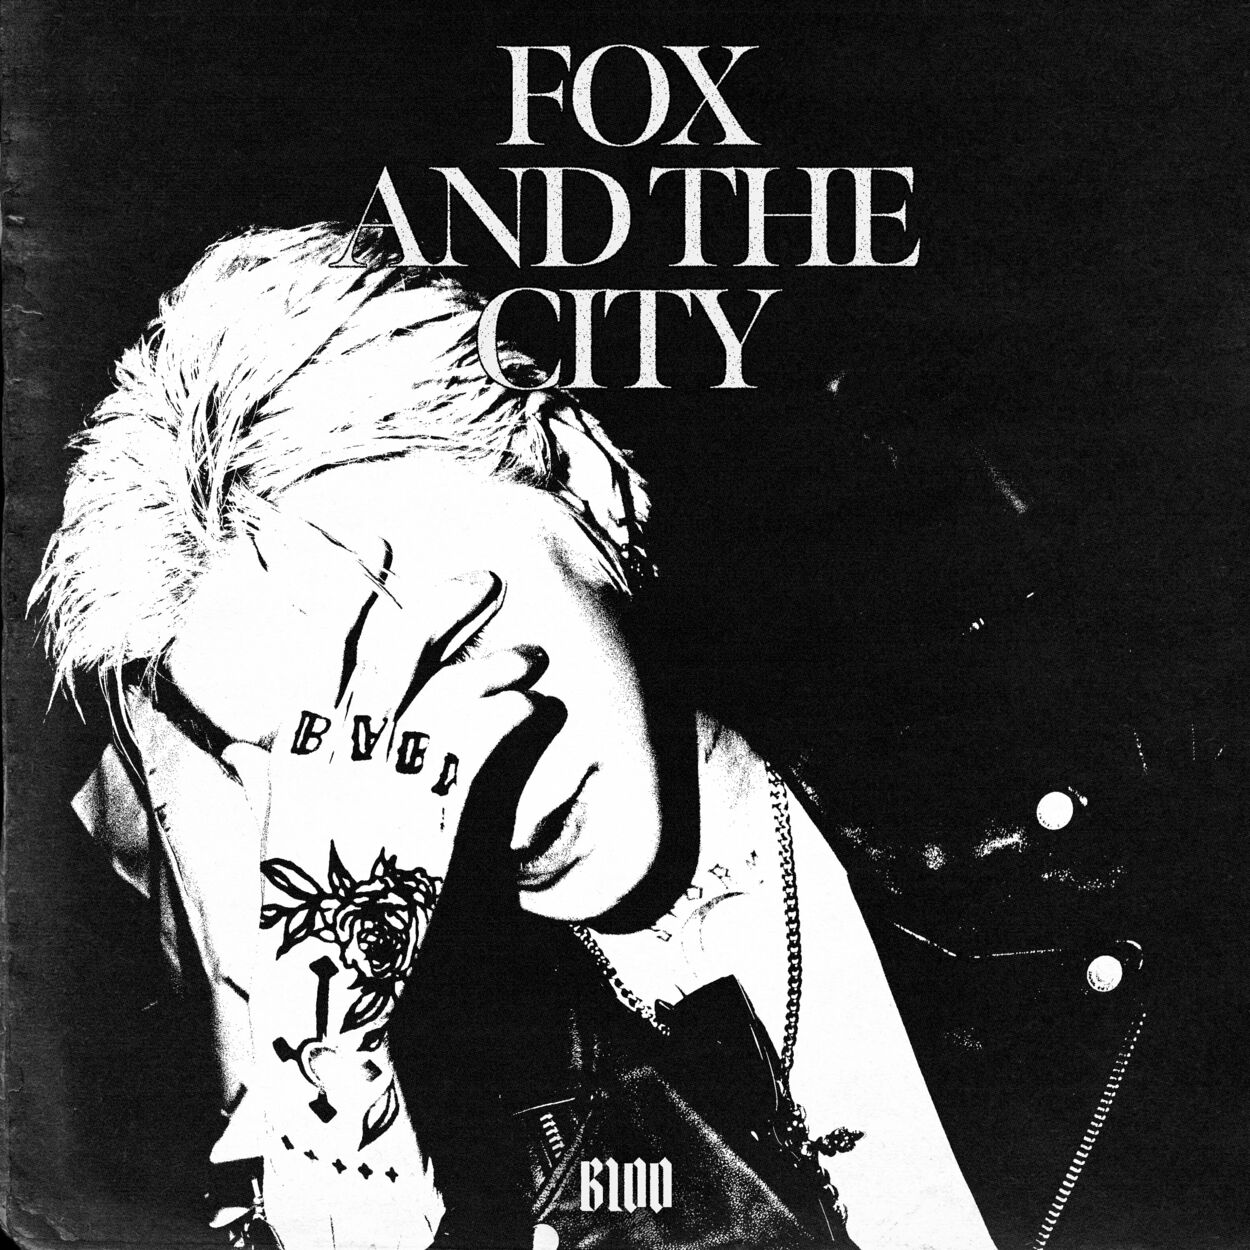 BLOO – Fox and the City